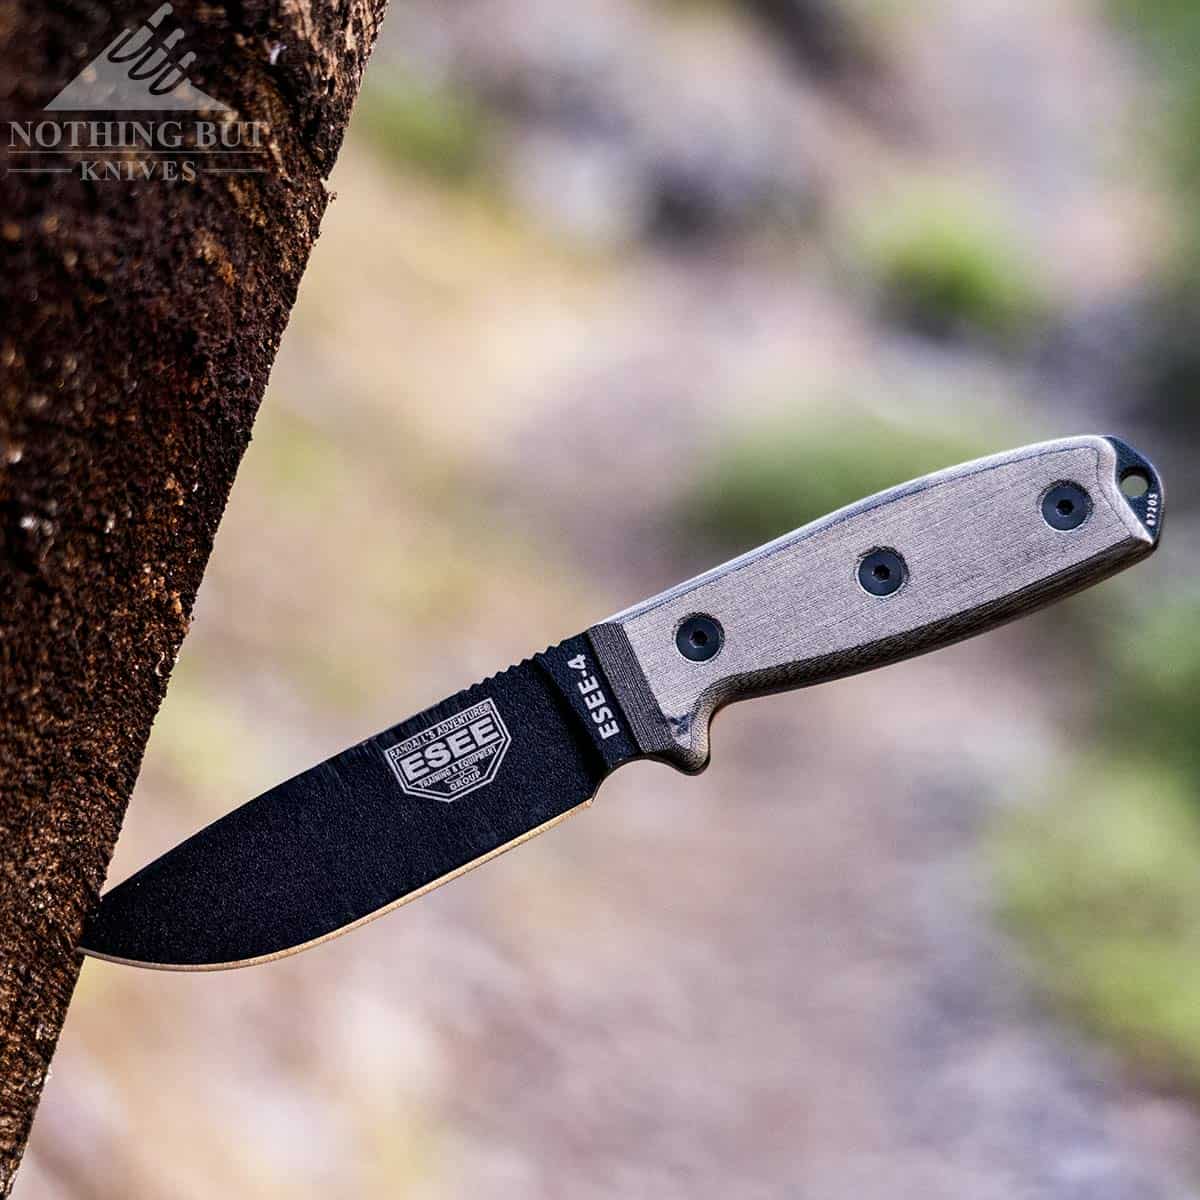 The Esee 4 is a great camping or backpacking knife. Shown here sticking out of a tree on a mountain trail. 